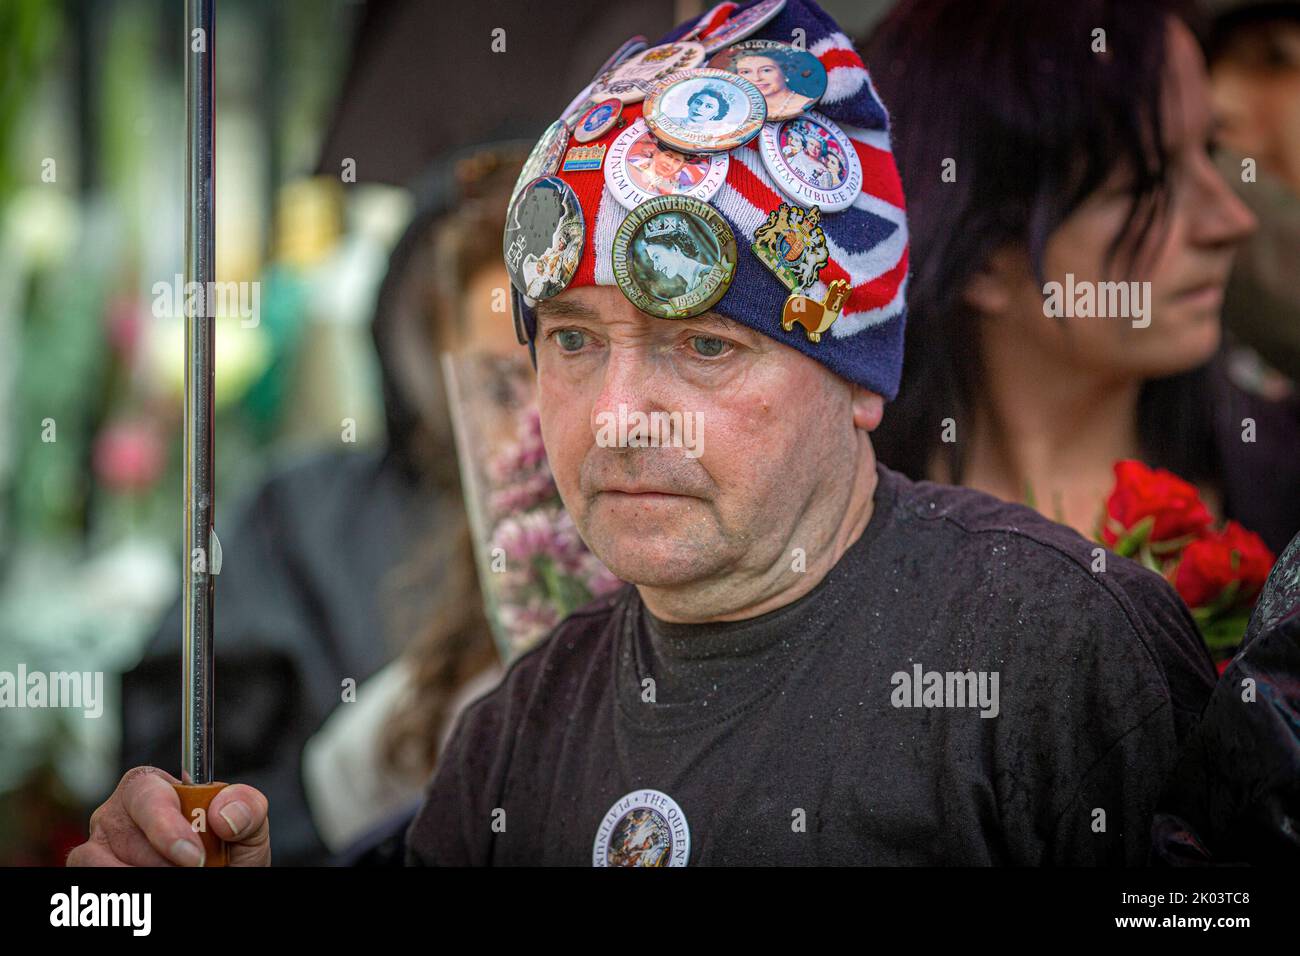 London UK. 9 September 2022. A man dressed in Queen memorabilia and badges outside Buckingham Palace, London, following the death of Queen Elizabeth II on Thursday.Photo: Horst A. Friedrichs Alamy Live News Stock Photo